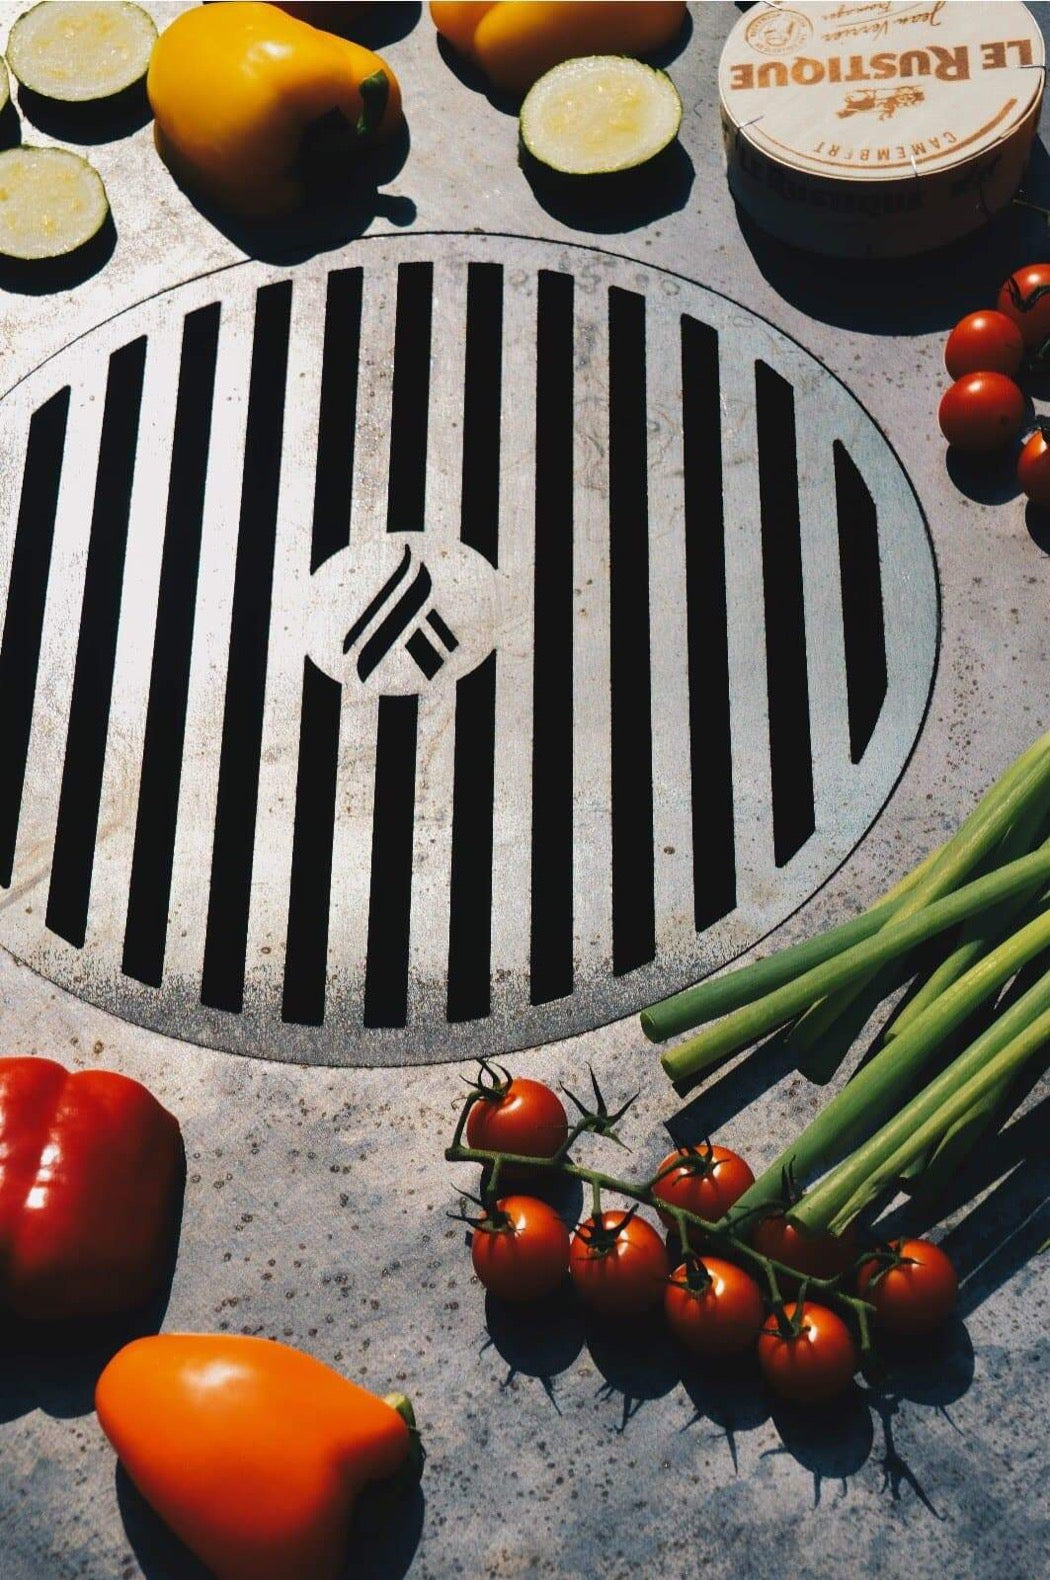 Classic / Euro / One 40 - Grill Grate - Arteflame Outdoor Charcoal Grill Griddle Combination.